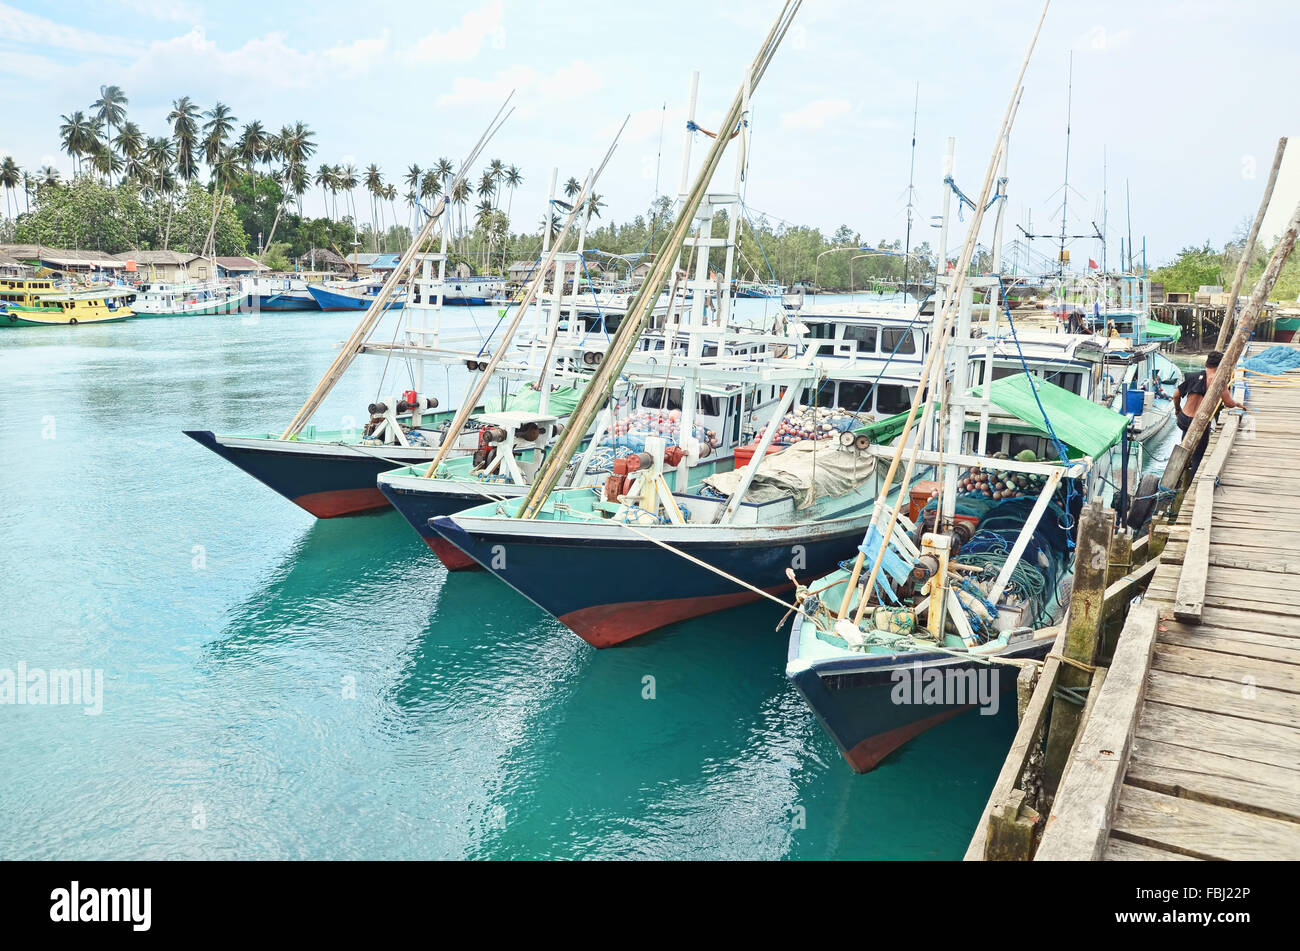 A group of wooden boats are moored by the dock Stock Photo